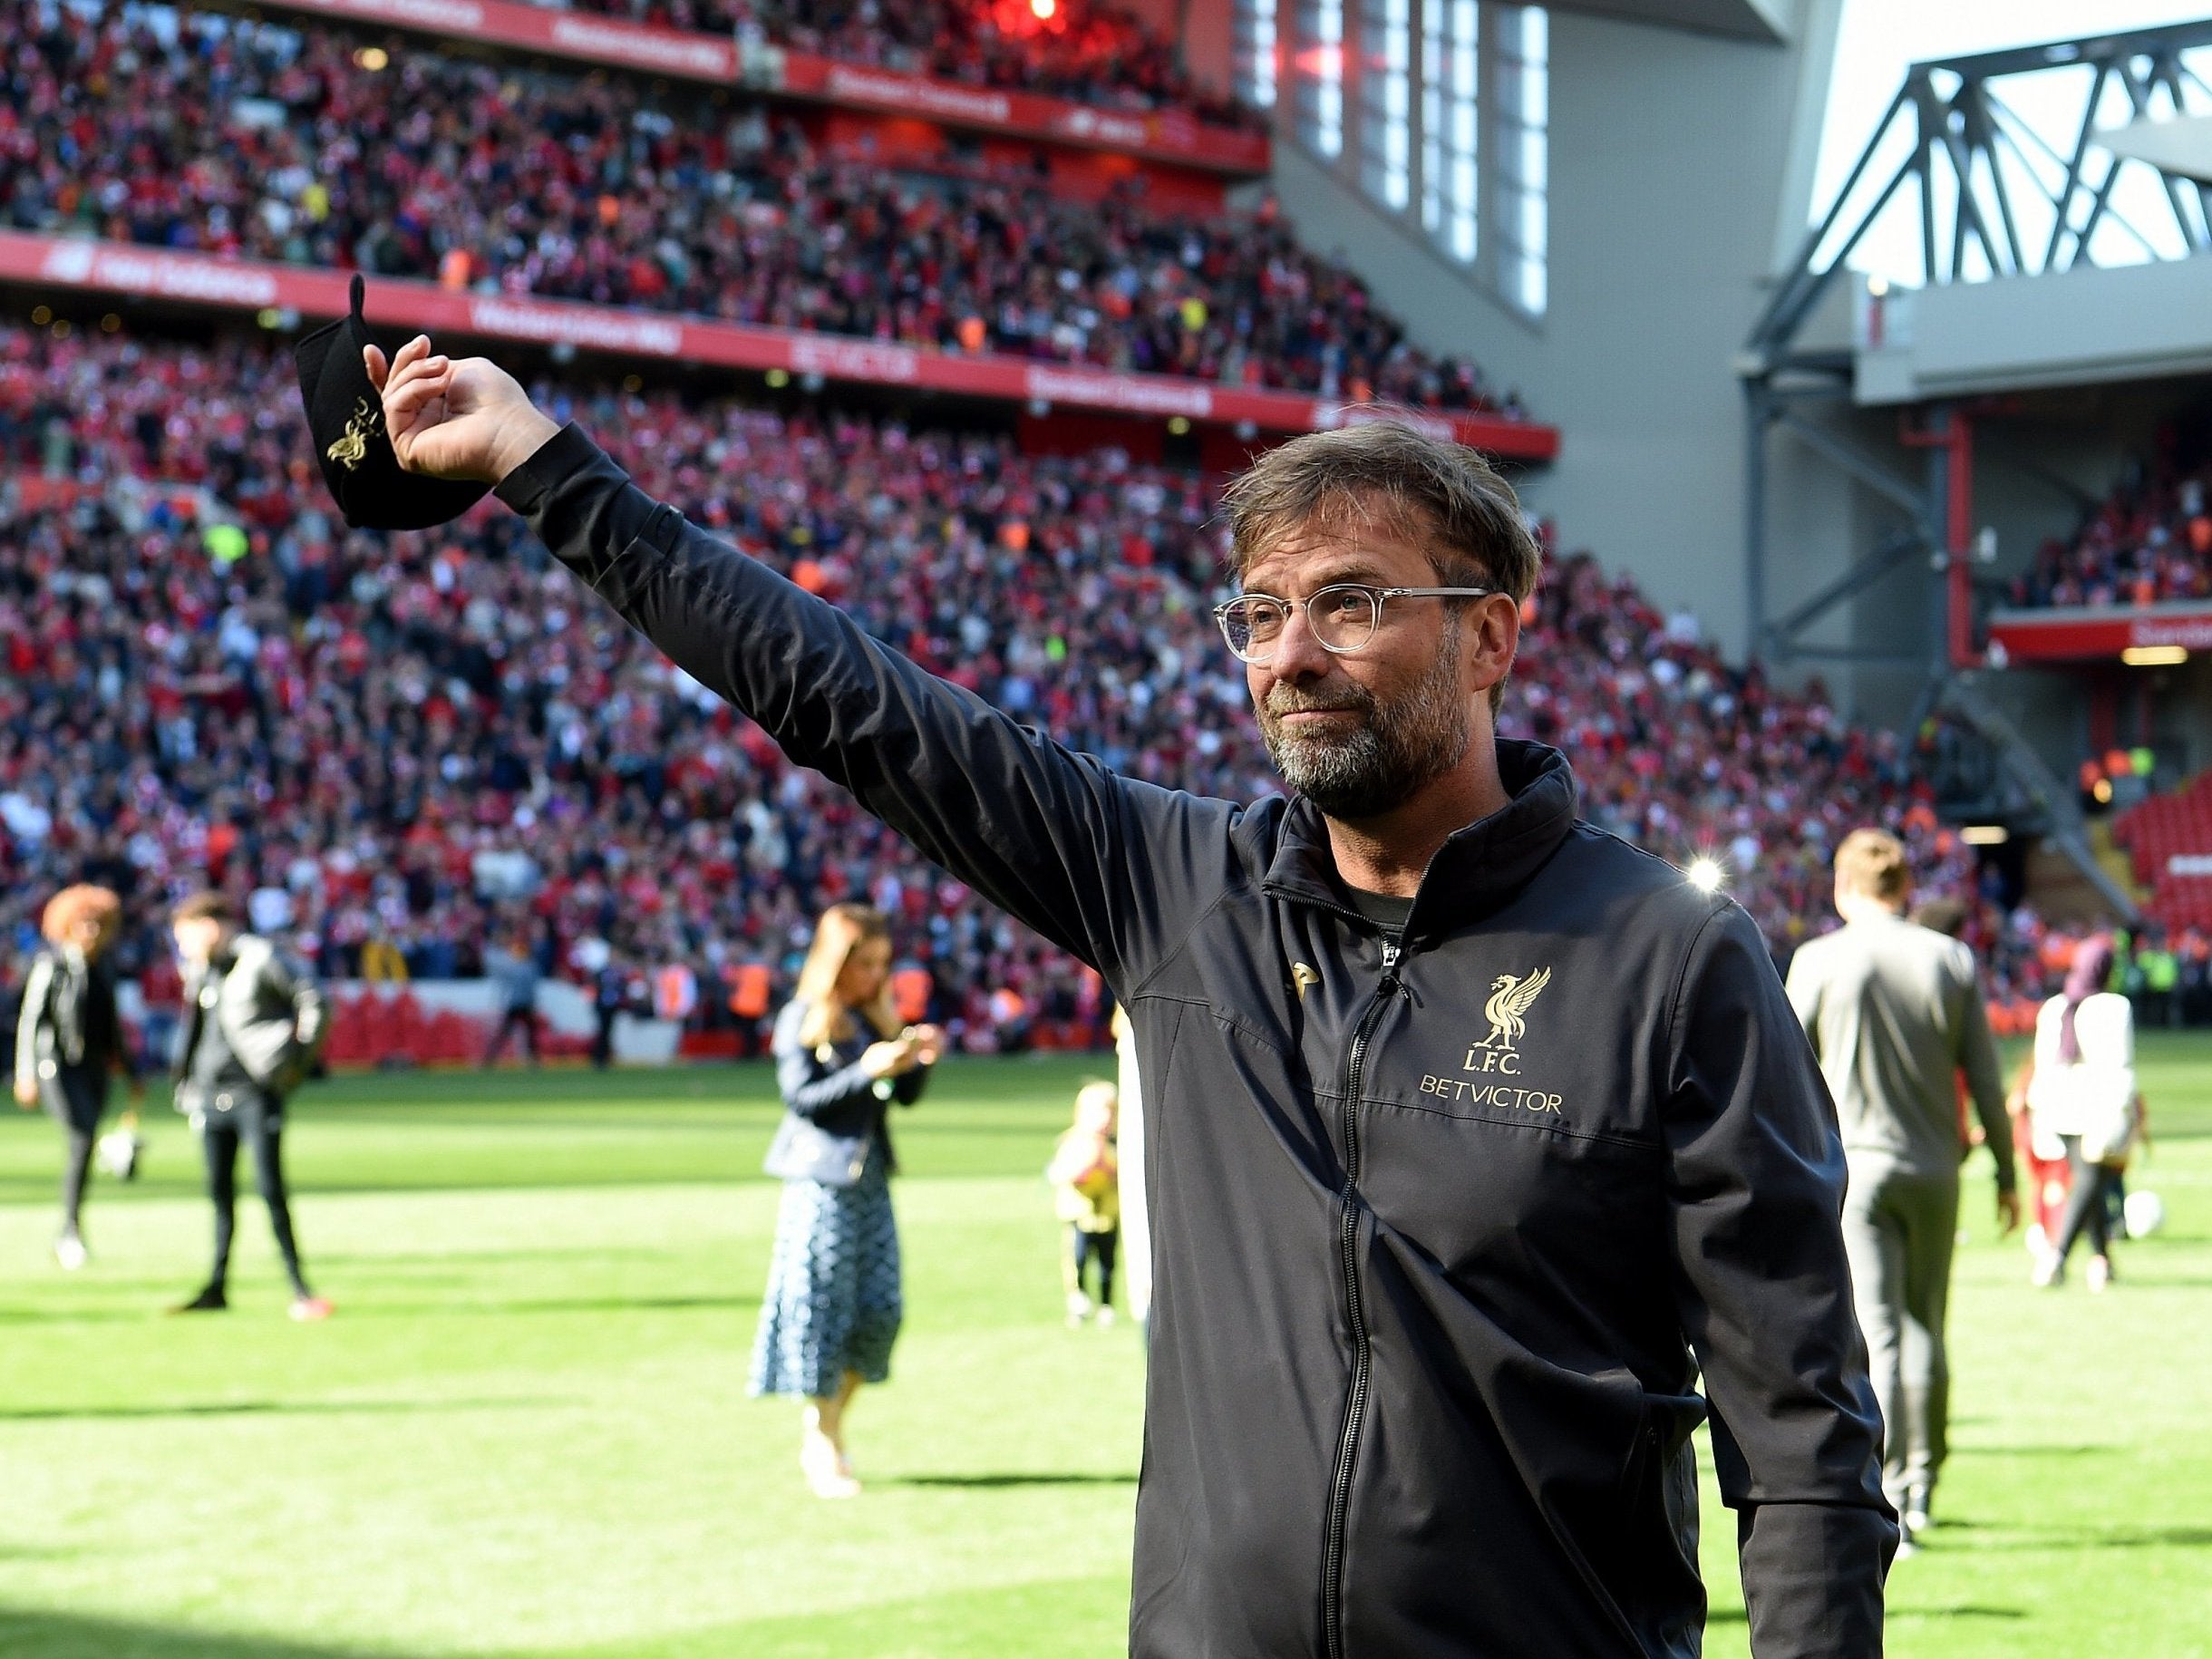 Klopp salutes the Liverpool fans